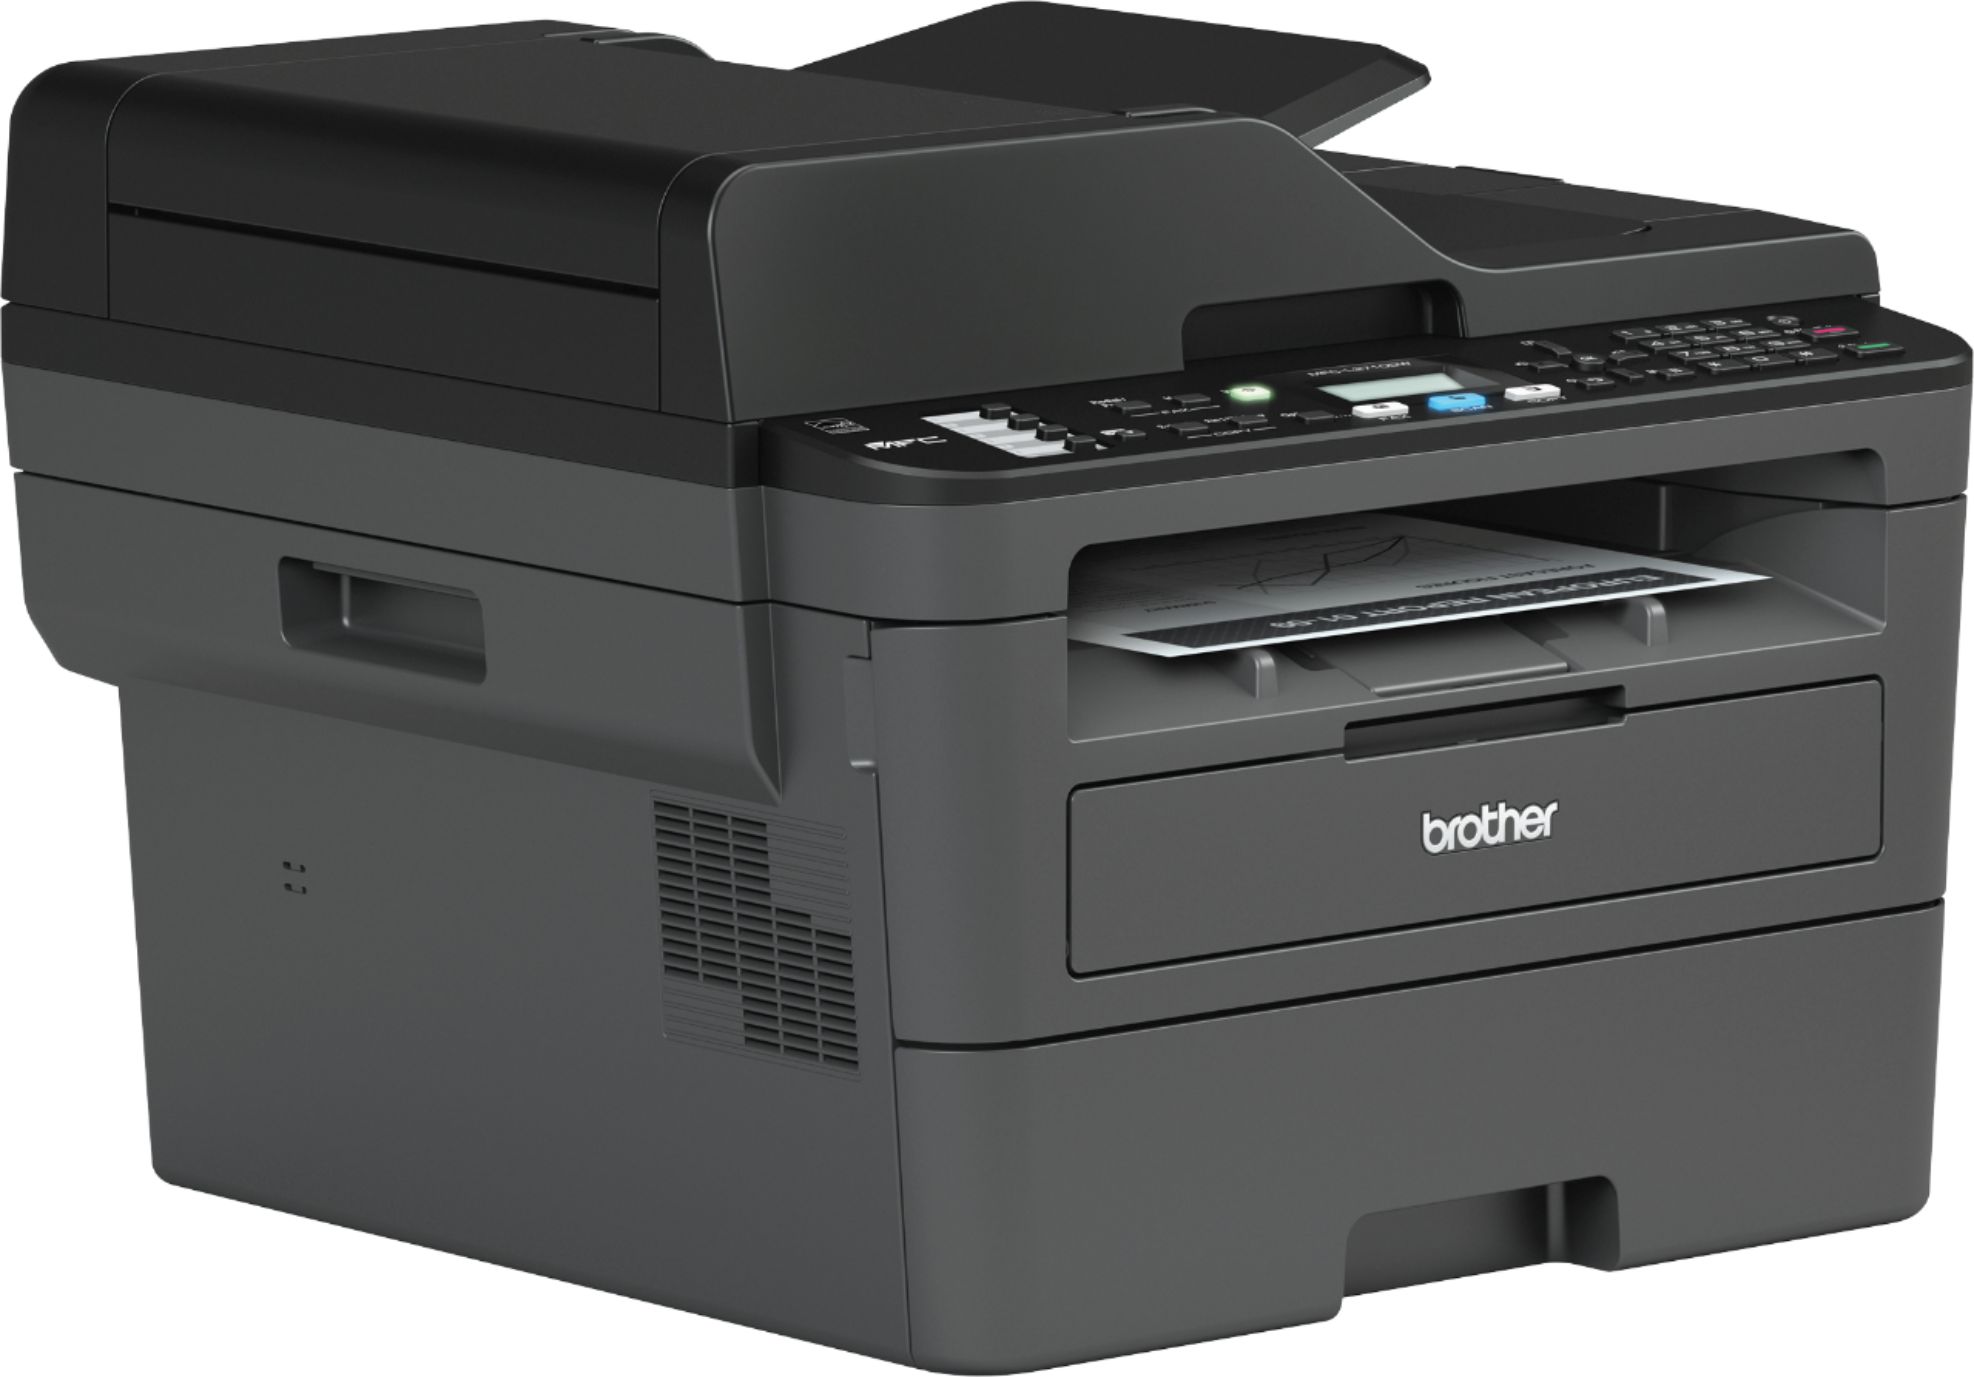 Brother MFC-L2710DW Wireless Black-and-White All-in-One Refresh  Subscription Eligible Laser Printer Black MFC-L2710DW - Best Buy